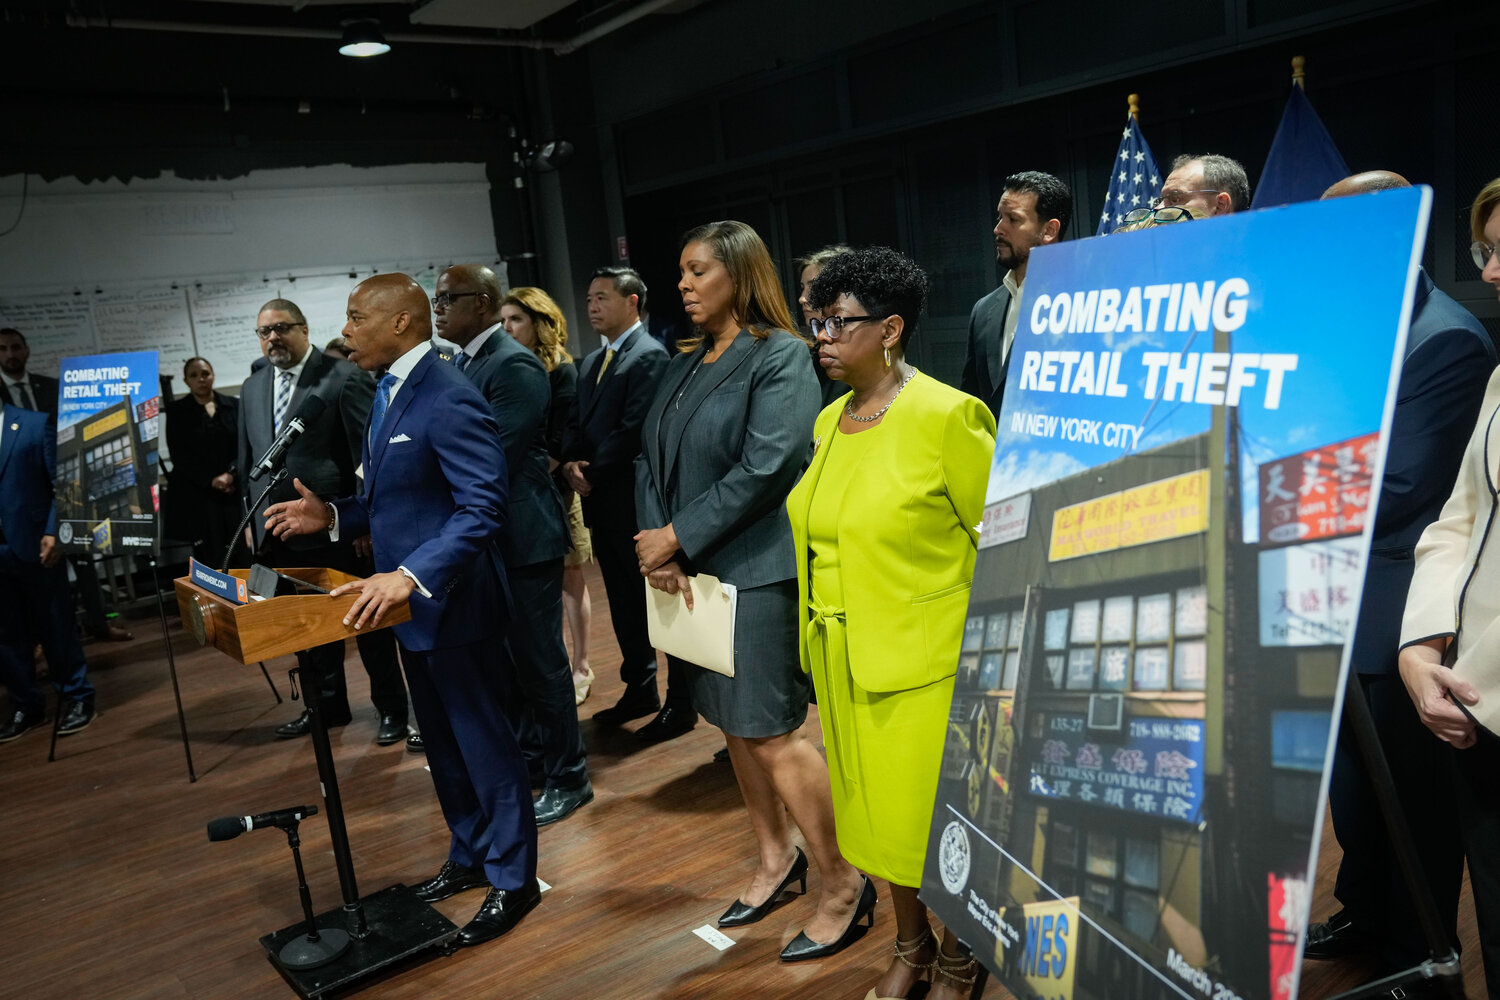 Mayor Eric Adams, together with state and other officials, announced a plan at the 125th Street Business Improvement District May 17 to combat retail theft across the five boroughs. To Adams’ right is Manhattan District Attorney Alvin Bragg and to his immediate left is state Attorney General Letitia James.